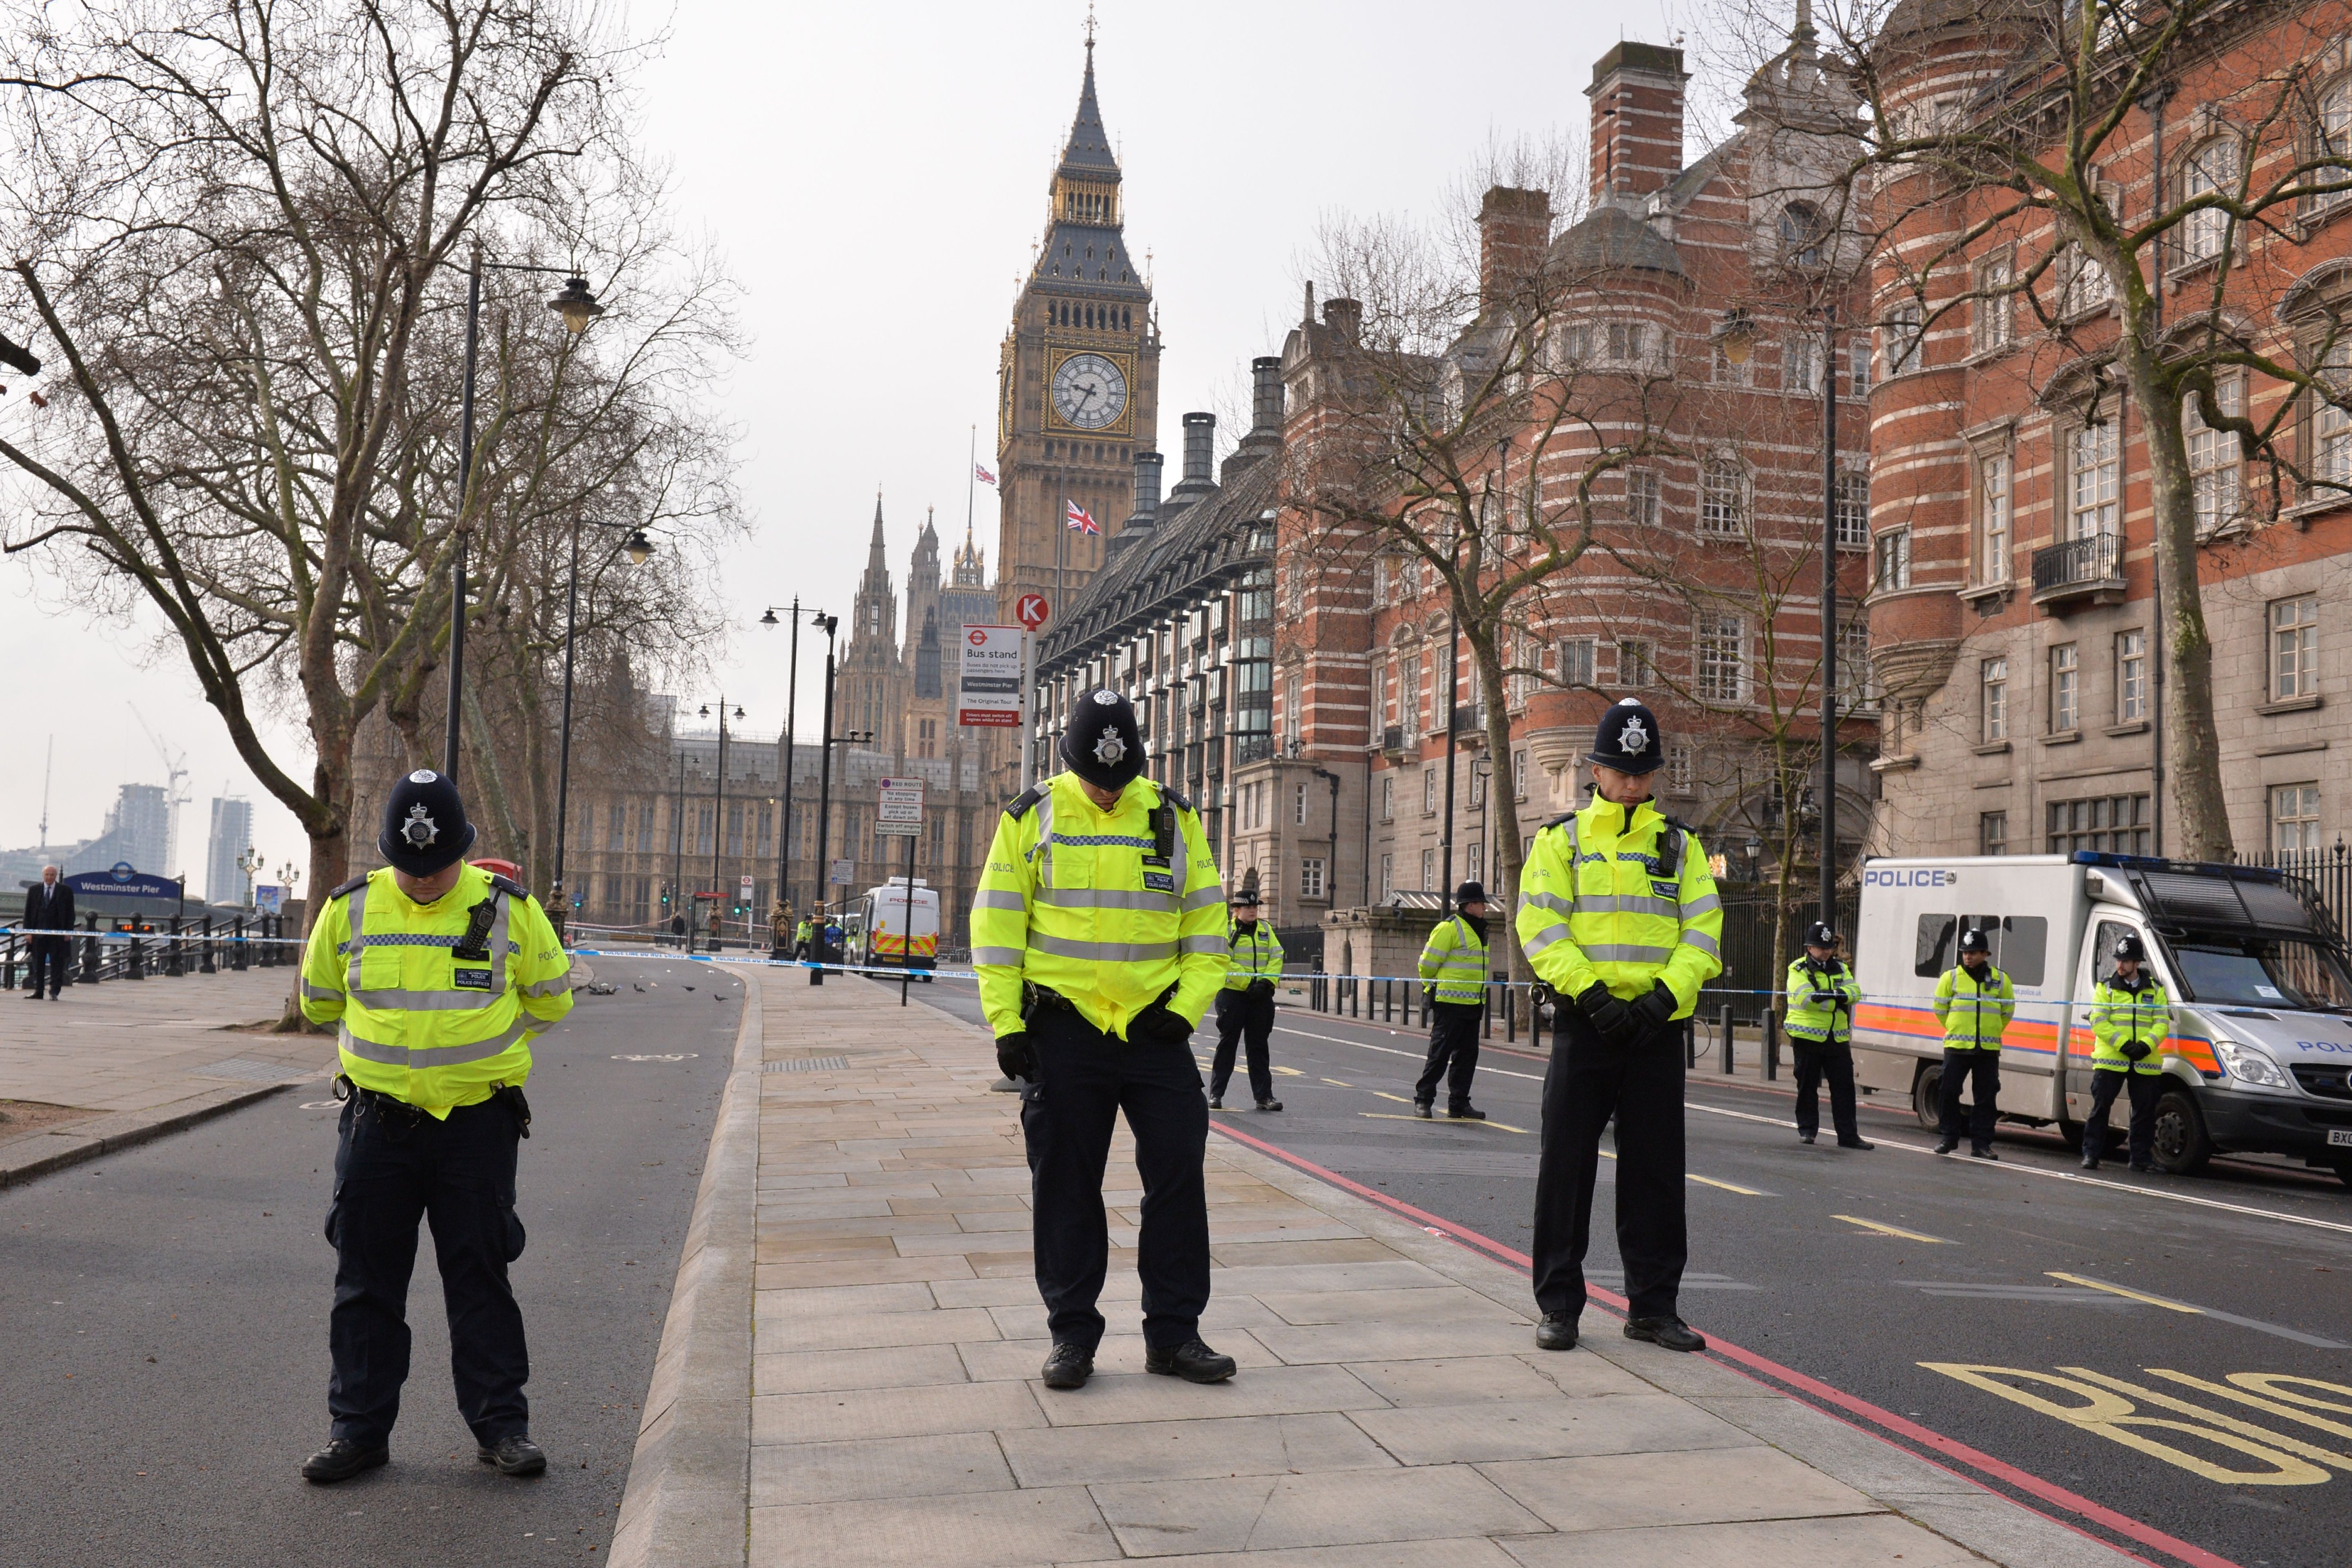 British police officers bow their heads as they stand near a police cordon directly outside New Scotland Yard and within sight of the Houses of Parliament in central London on March 23, 2017. (Justin Tallis—AFP/Getty Images)